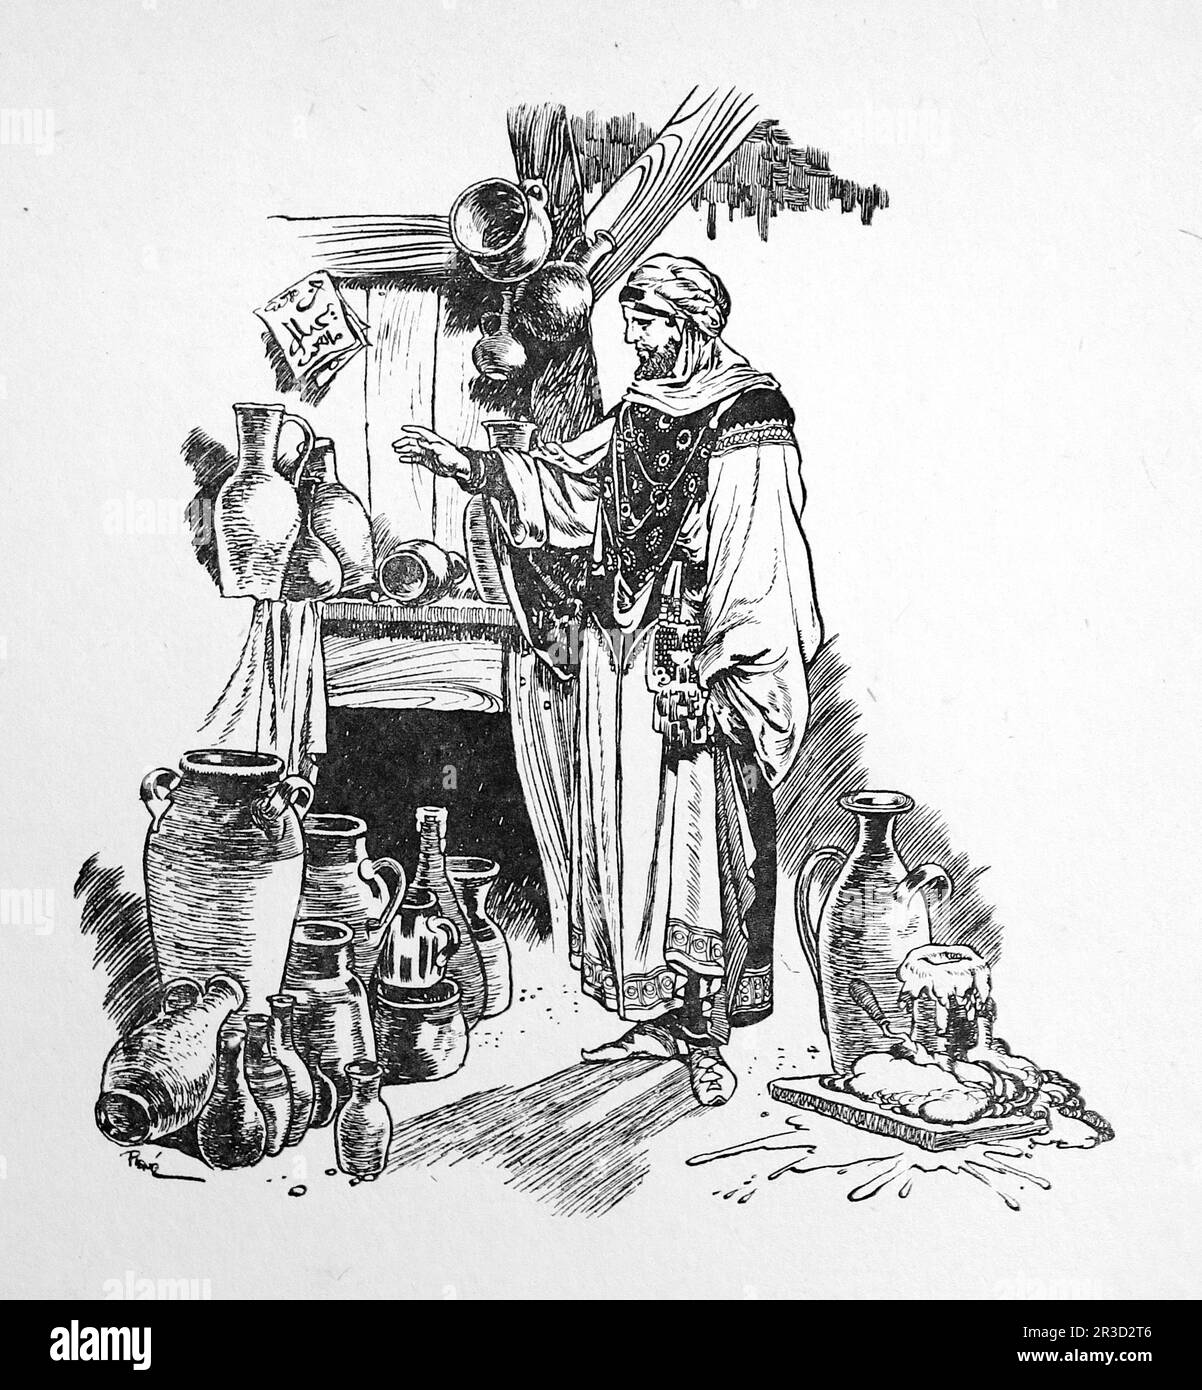 By Rene Bull. Line drawing of a man standing in a potter’s shop. From The Rubaiyat of Omar Khayyam. Stock Photo